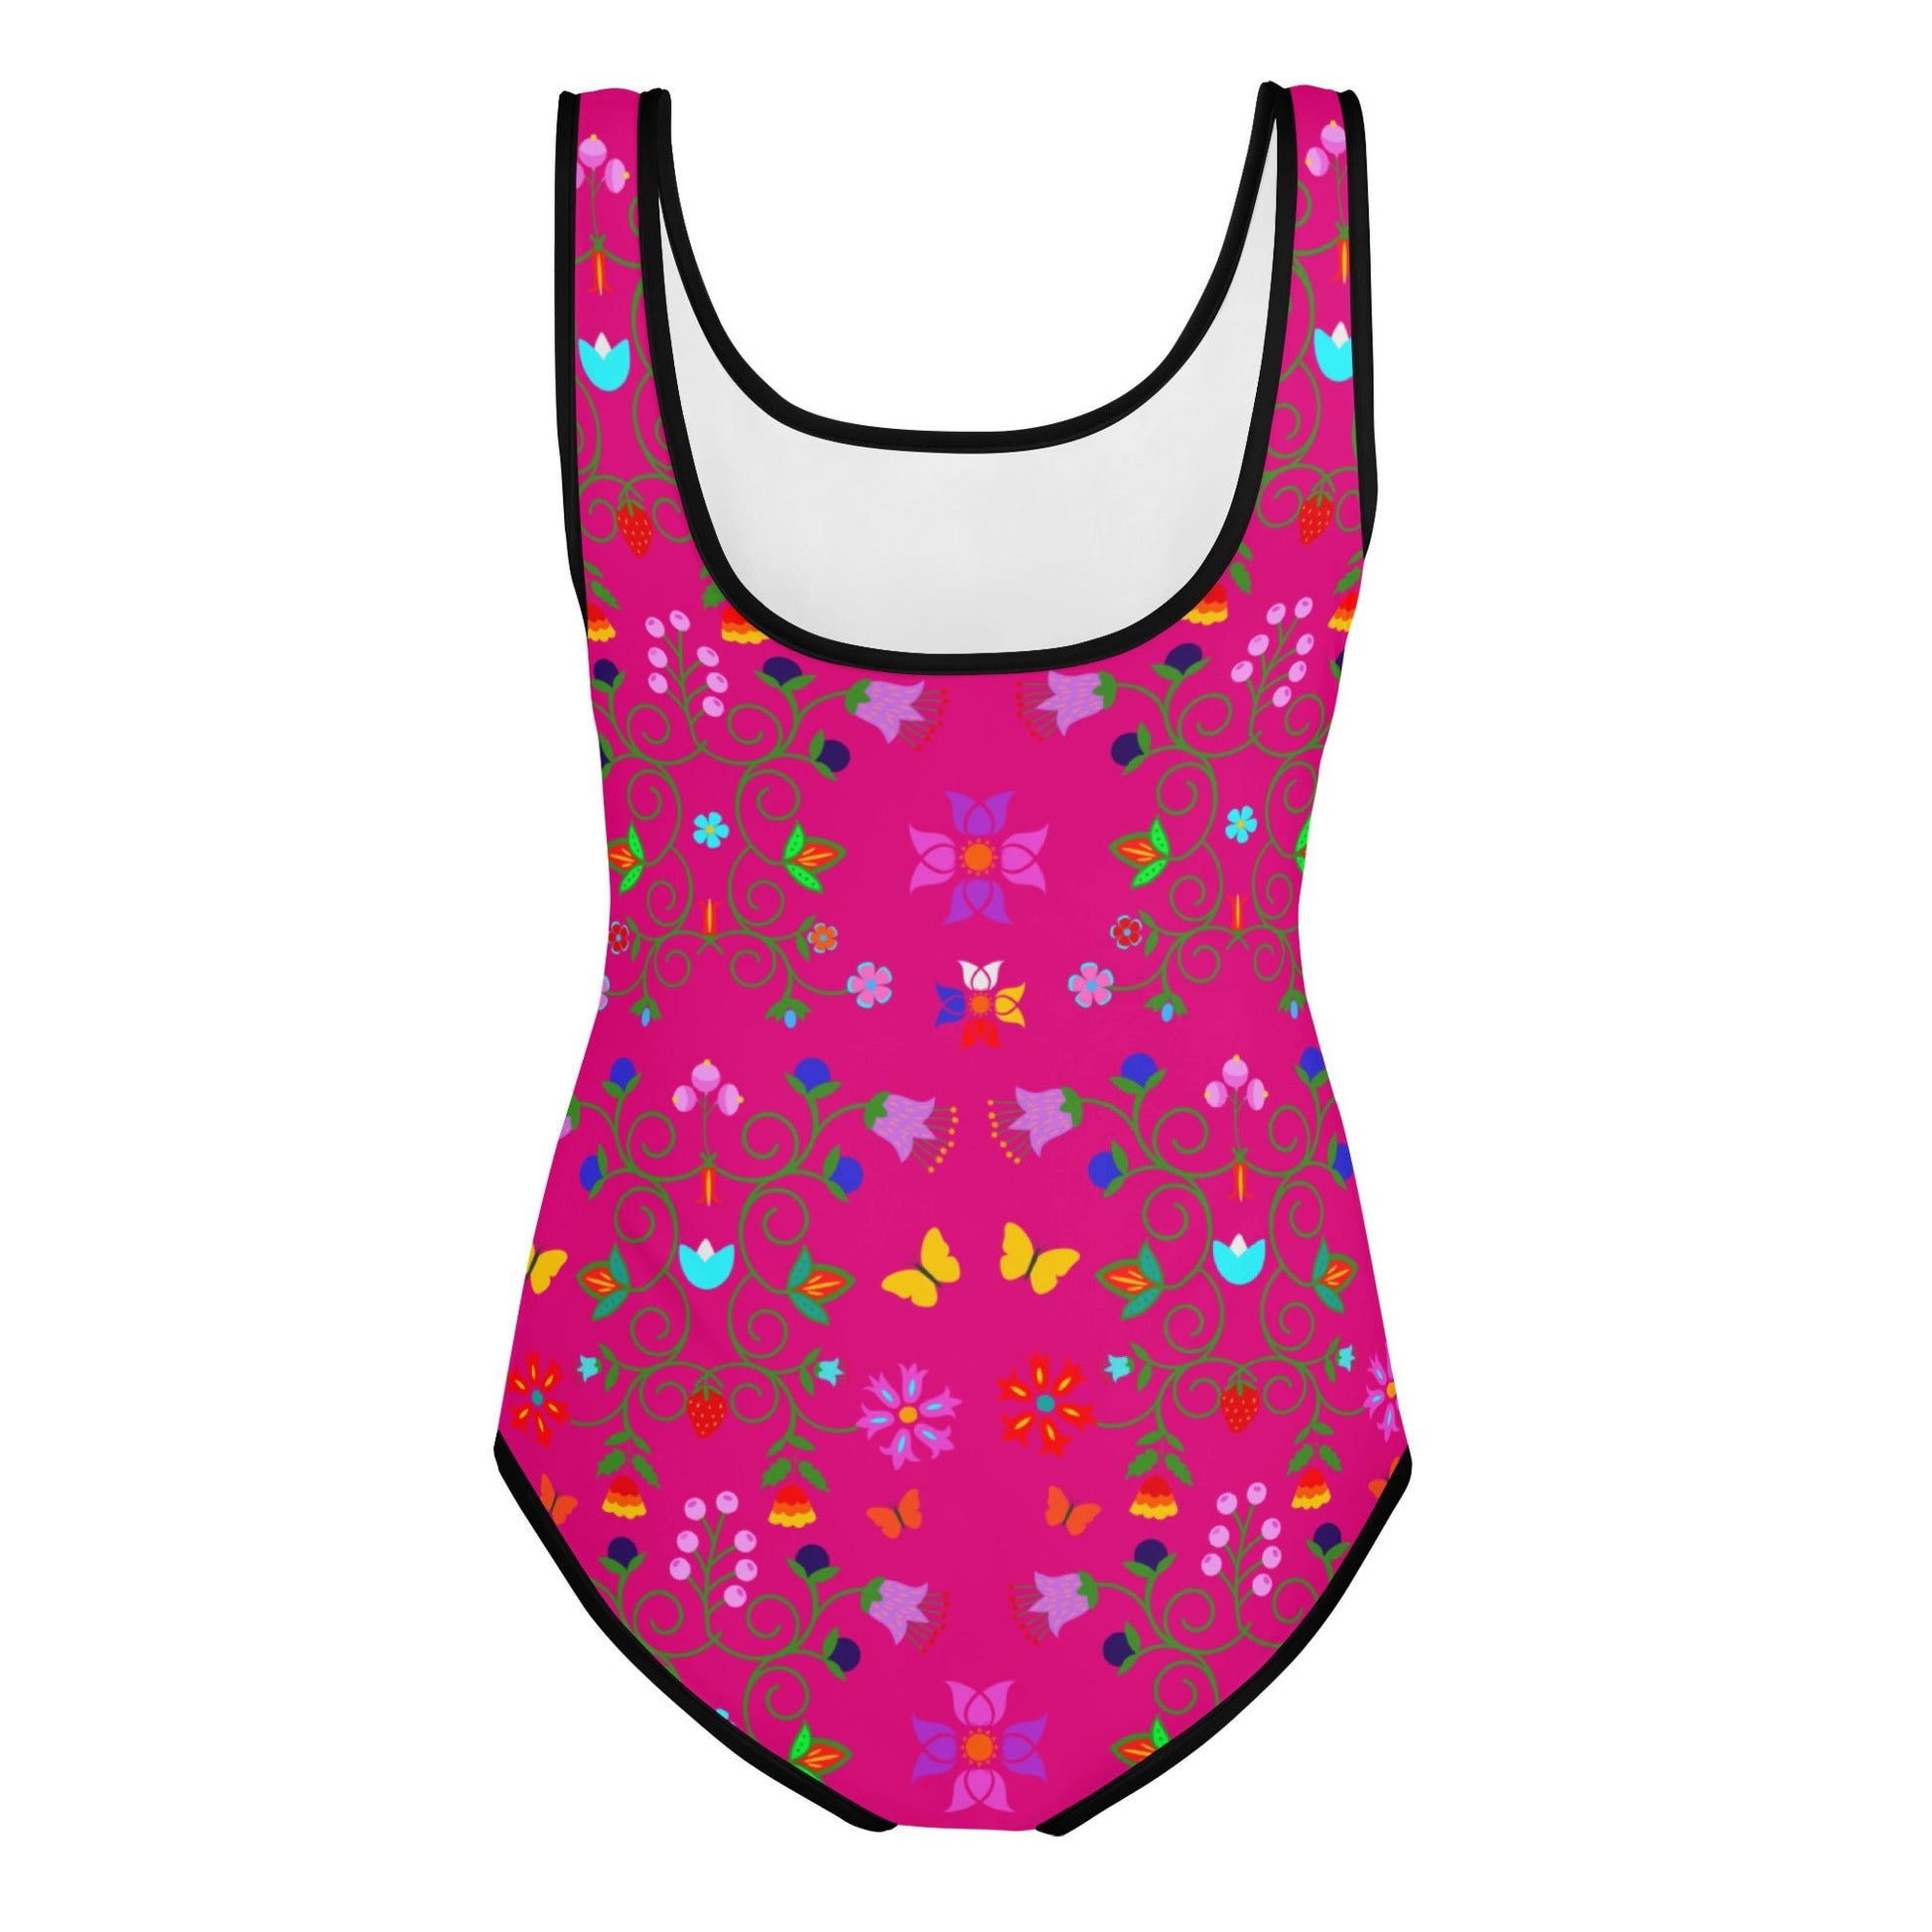 Native Floral Print Youth Violet Red Swimsuit - Nikikw Designs